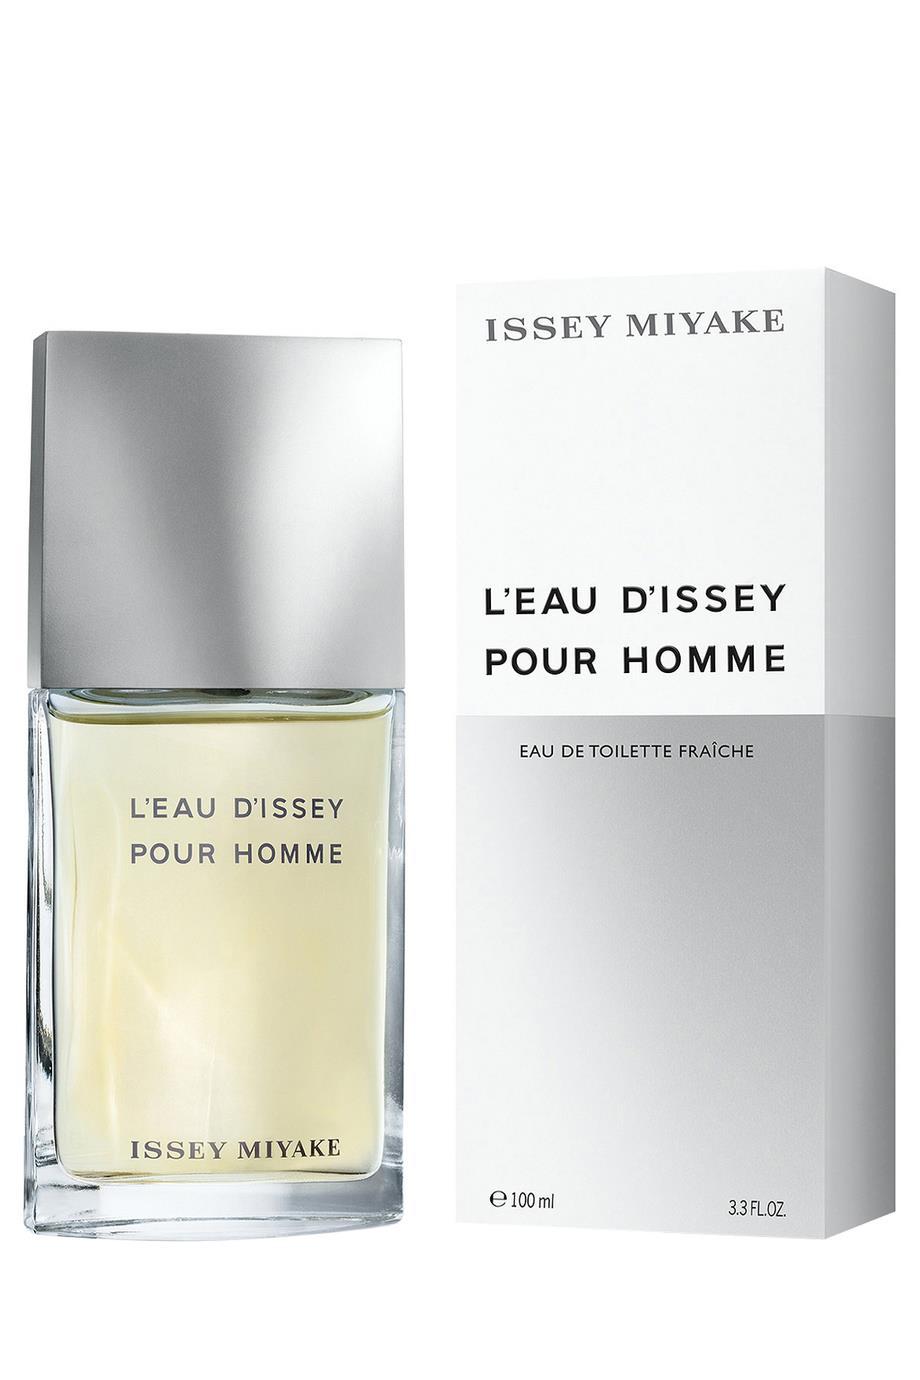 ISSEY MIYAKE L'EAU D'ISSEY POUR HOMME FRAICHE EDT 100ML | Perfume in ...